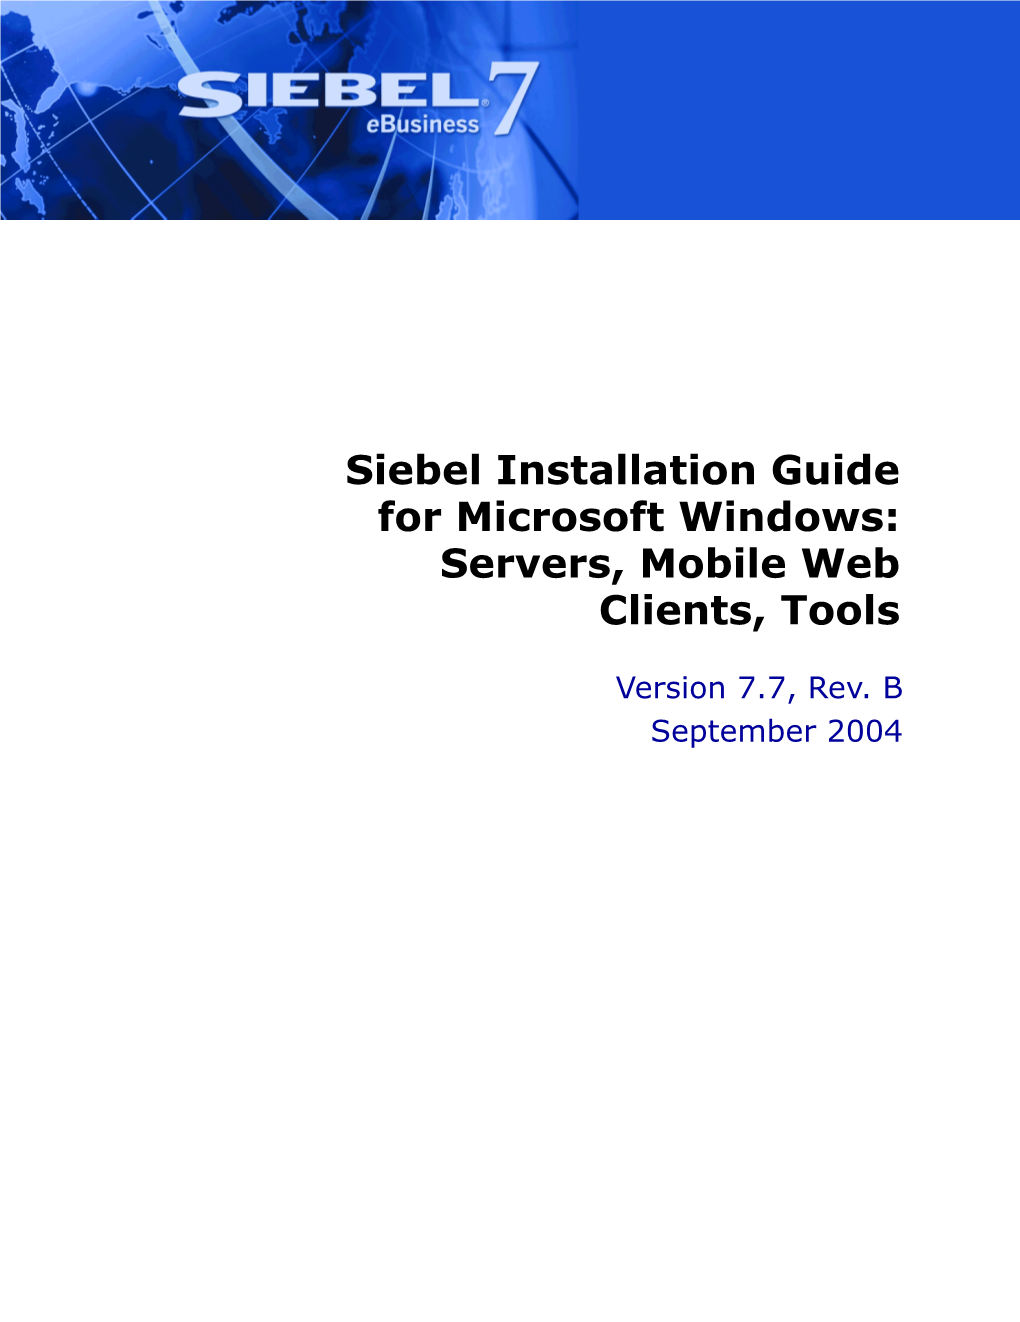 Siebel Installation Guide for Microsoft Windows: Servers, Mobile Web Clients, Tools